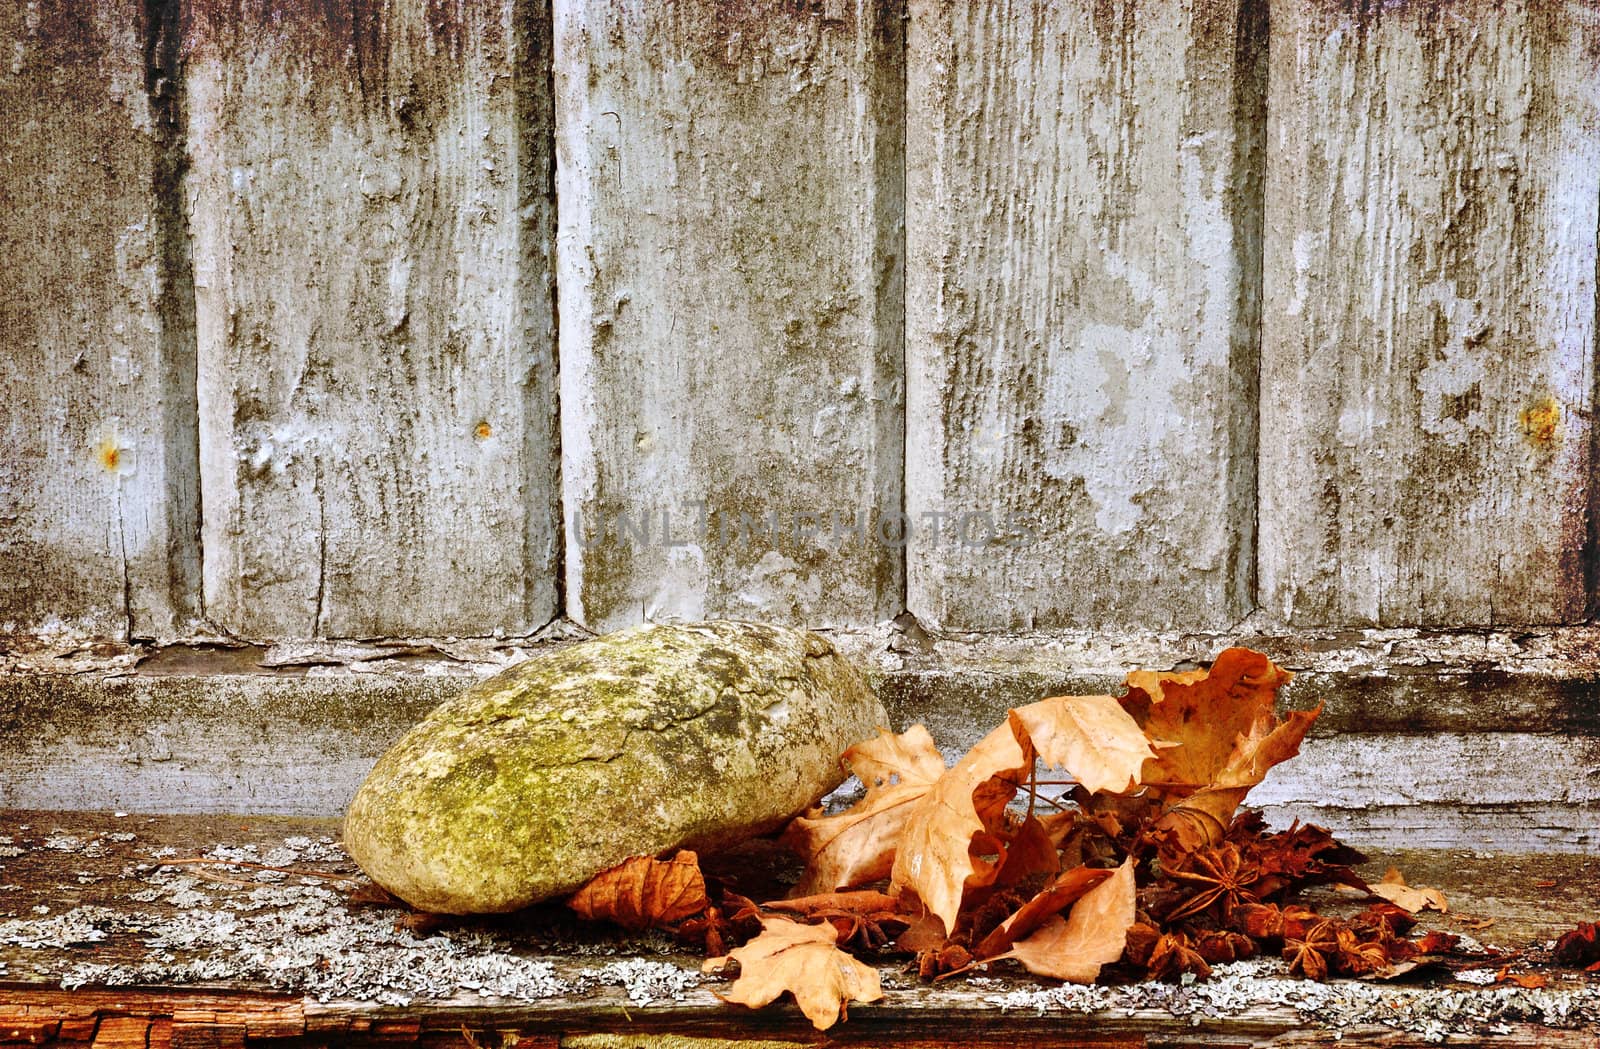 A rock and dry autumn leaves against an old wooden wall.